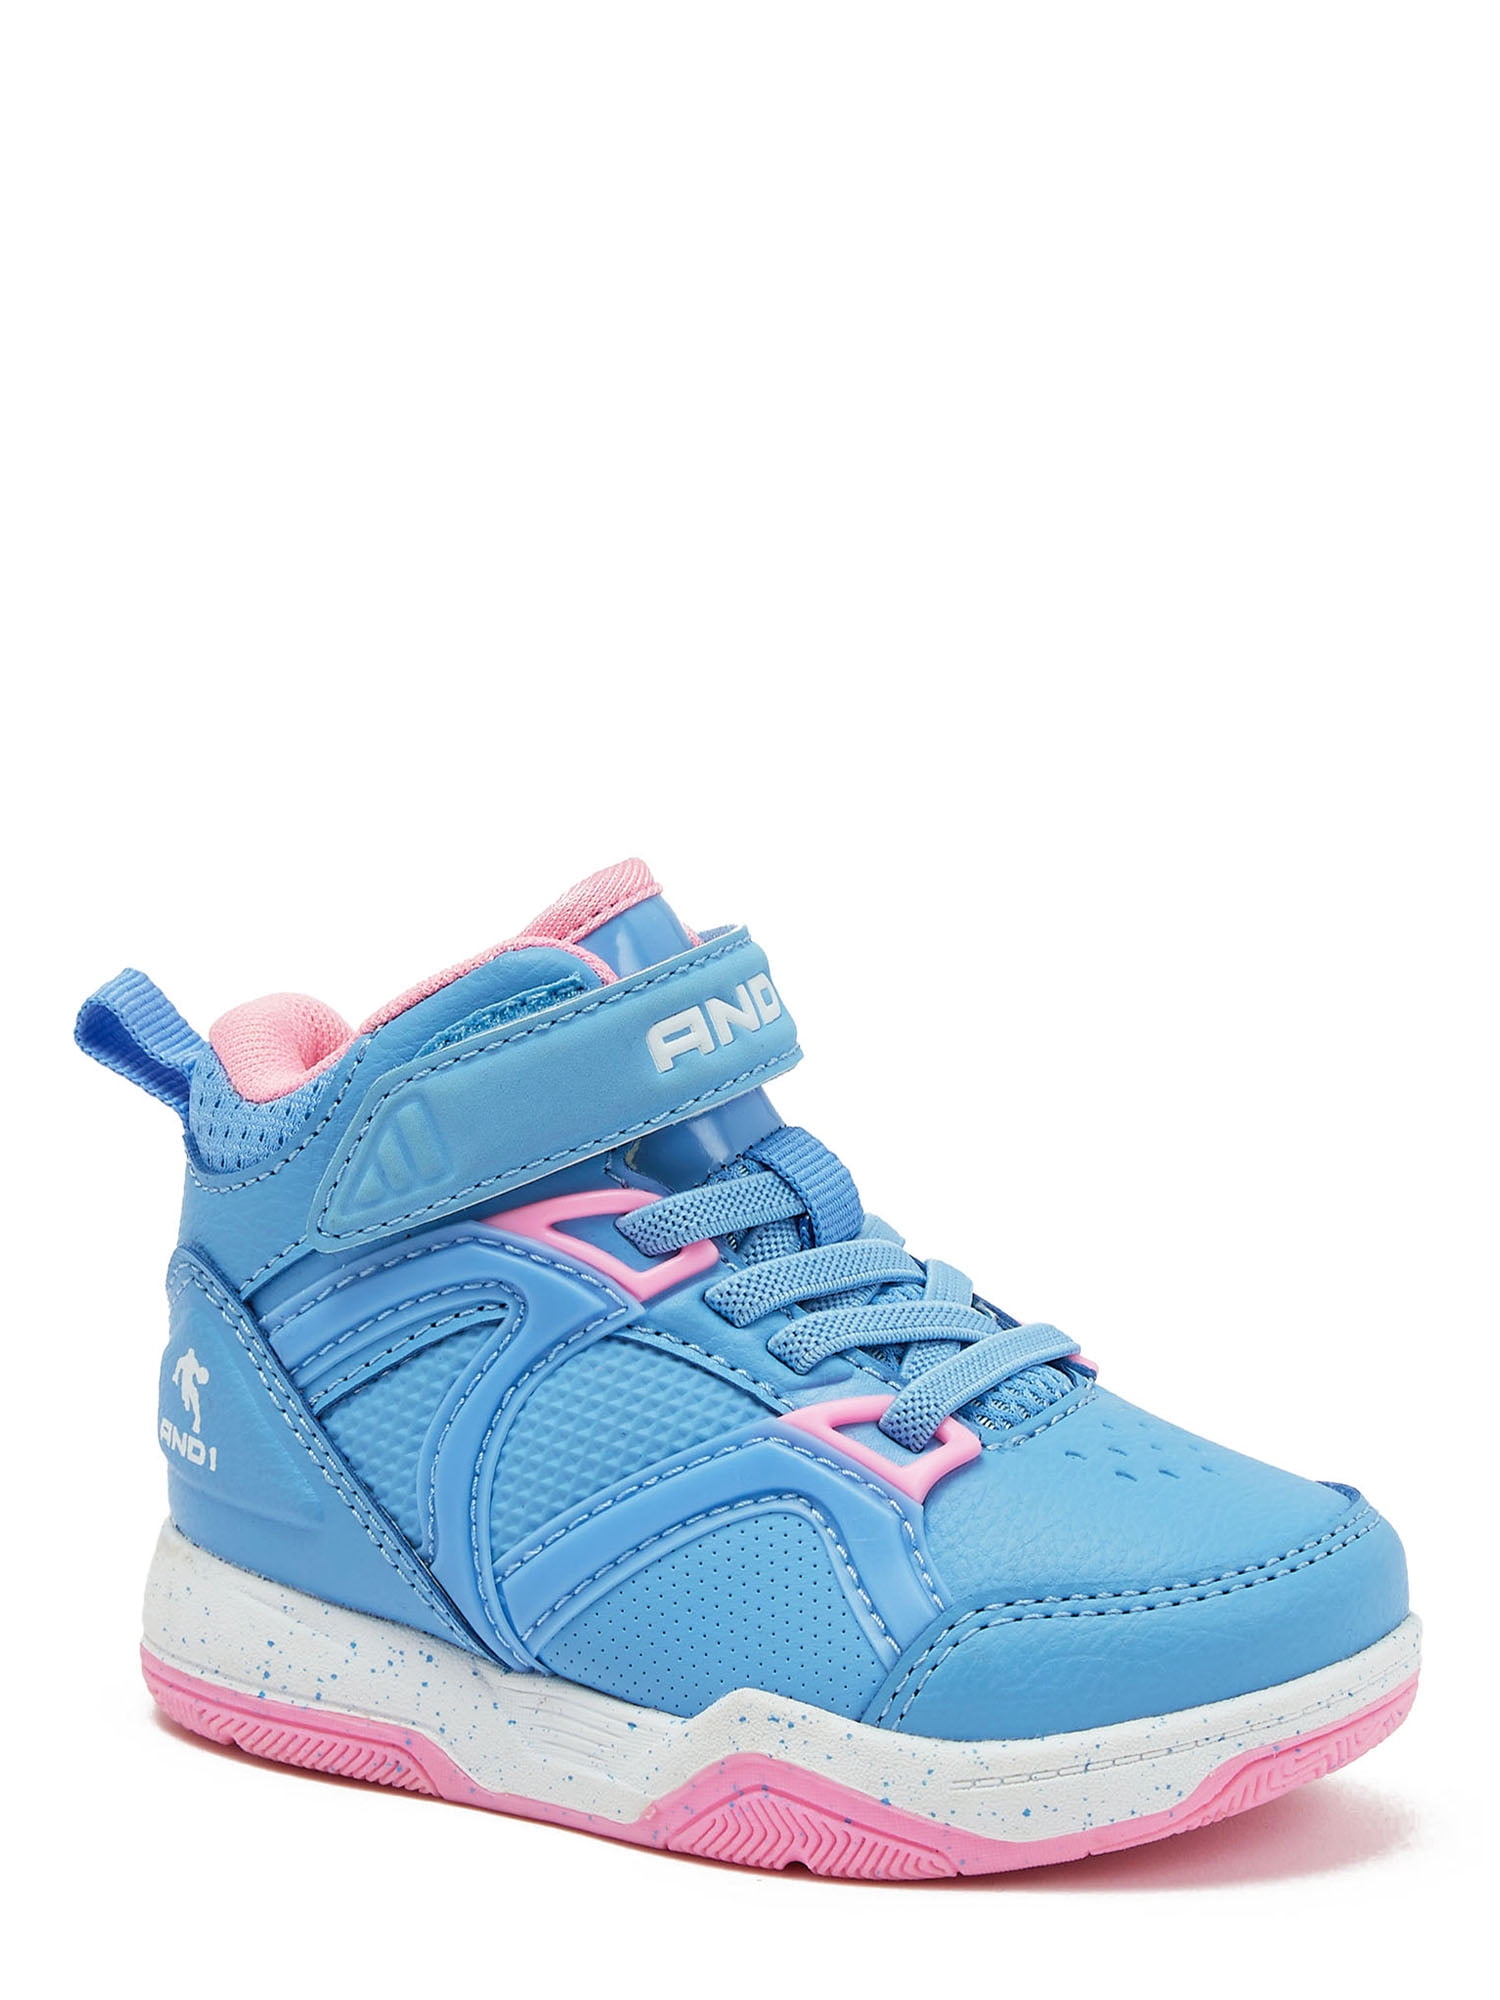 Toddler Girls Bow Pull On Sneakers | The Children's Place - PINK